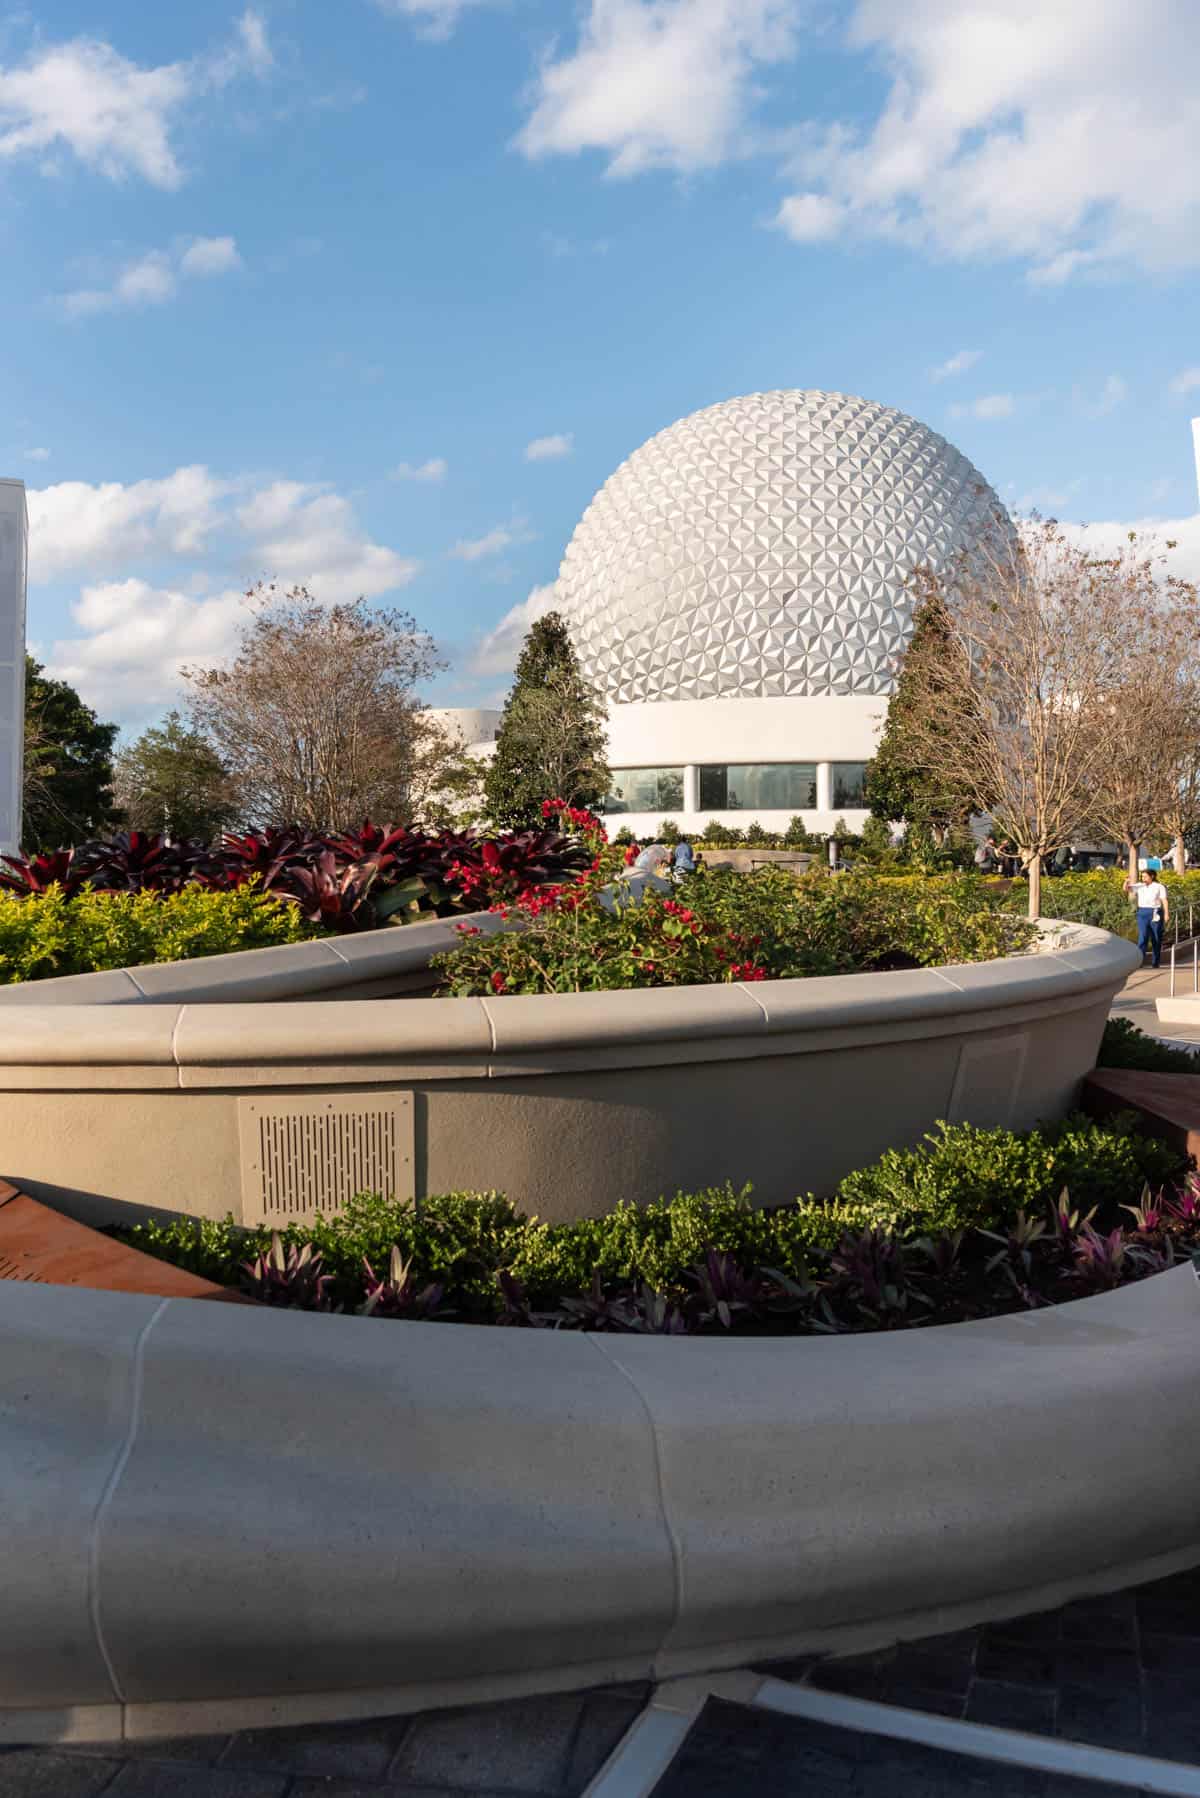 An image of the Epcot sphere with planter beds in front.